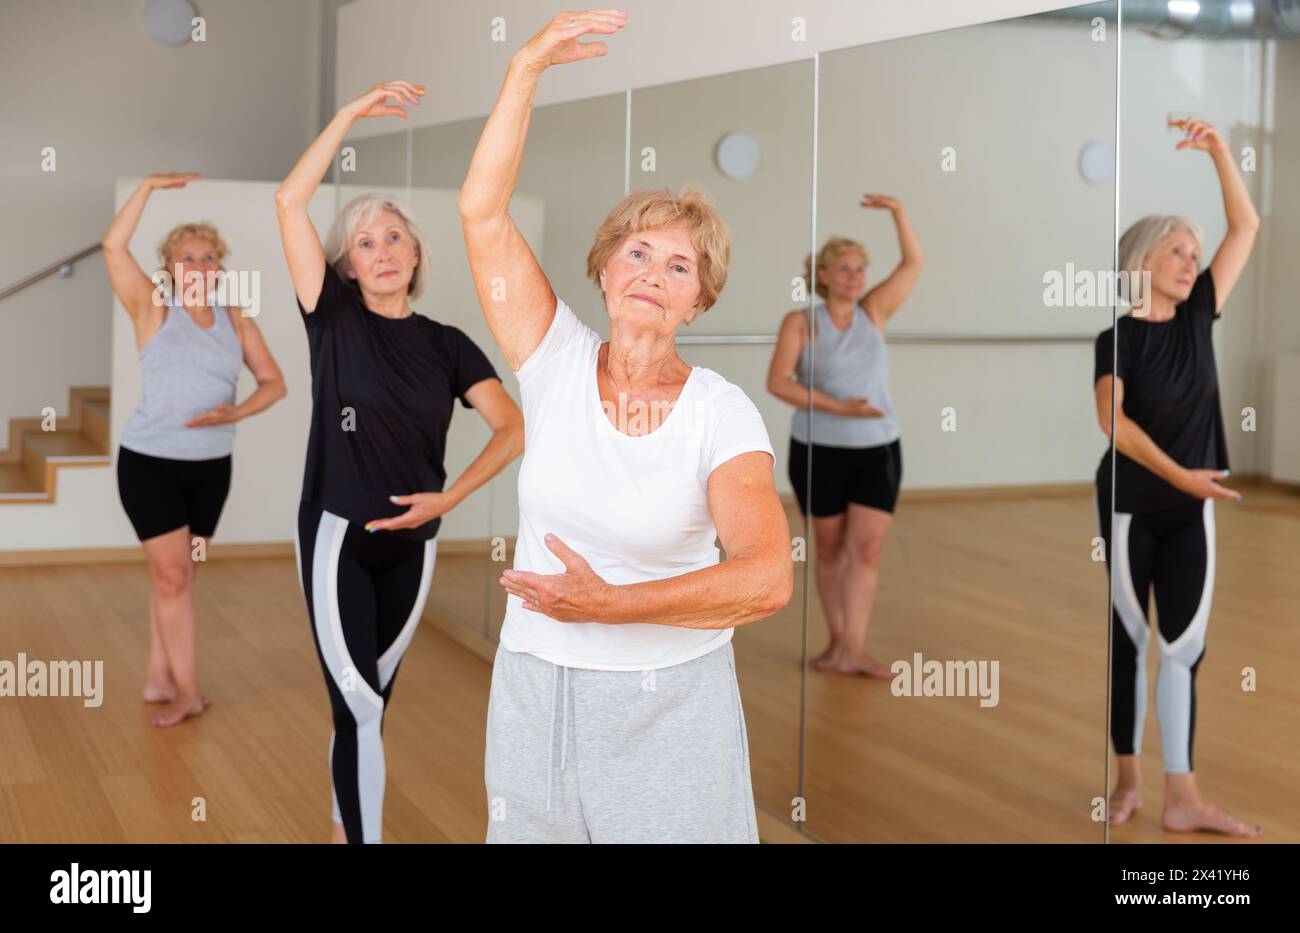 Senior lady learning classic dance moves during group class Stock Photo